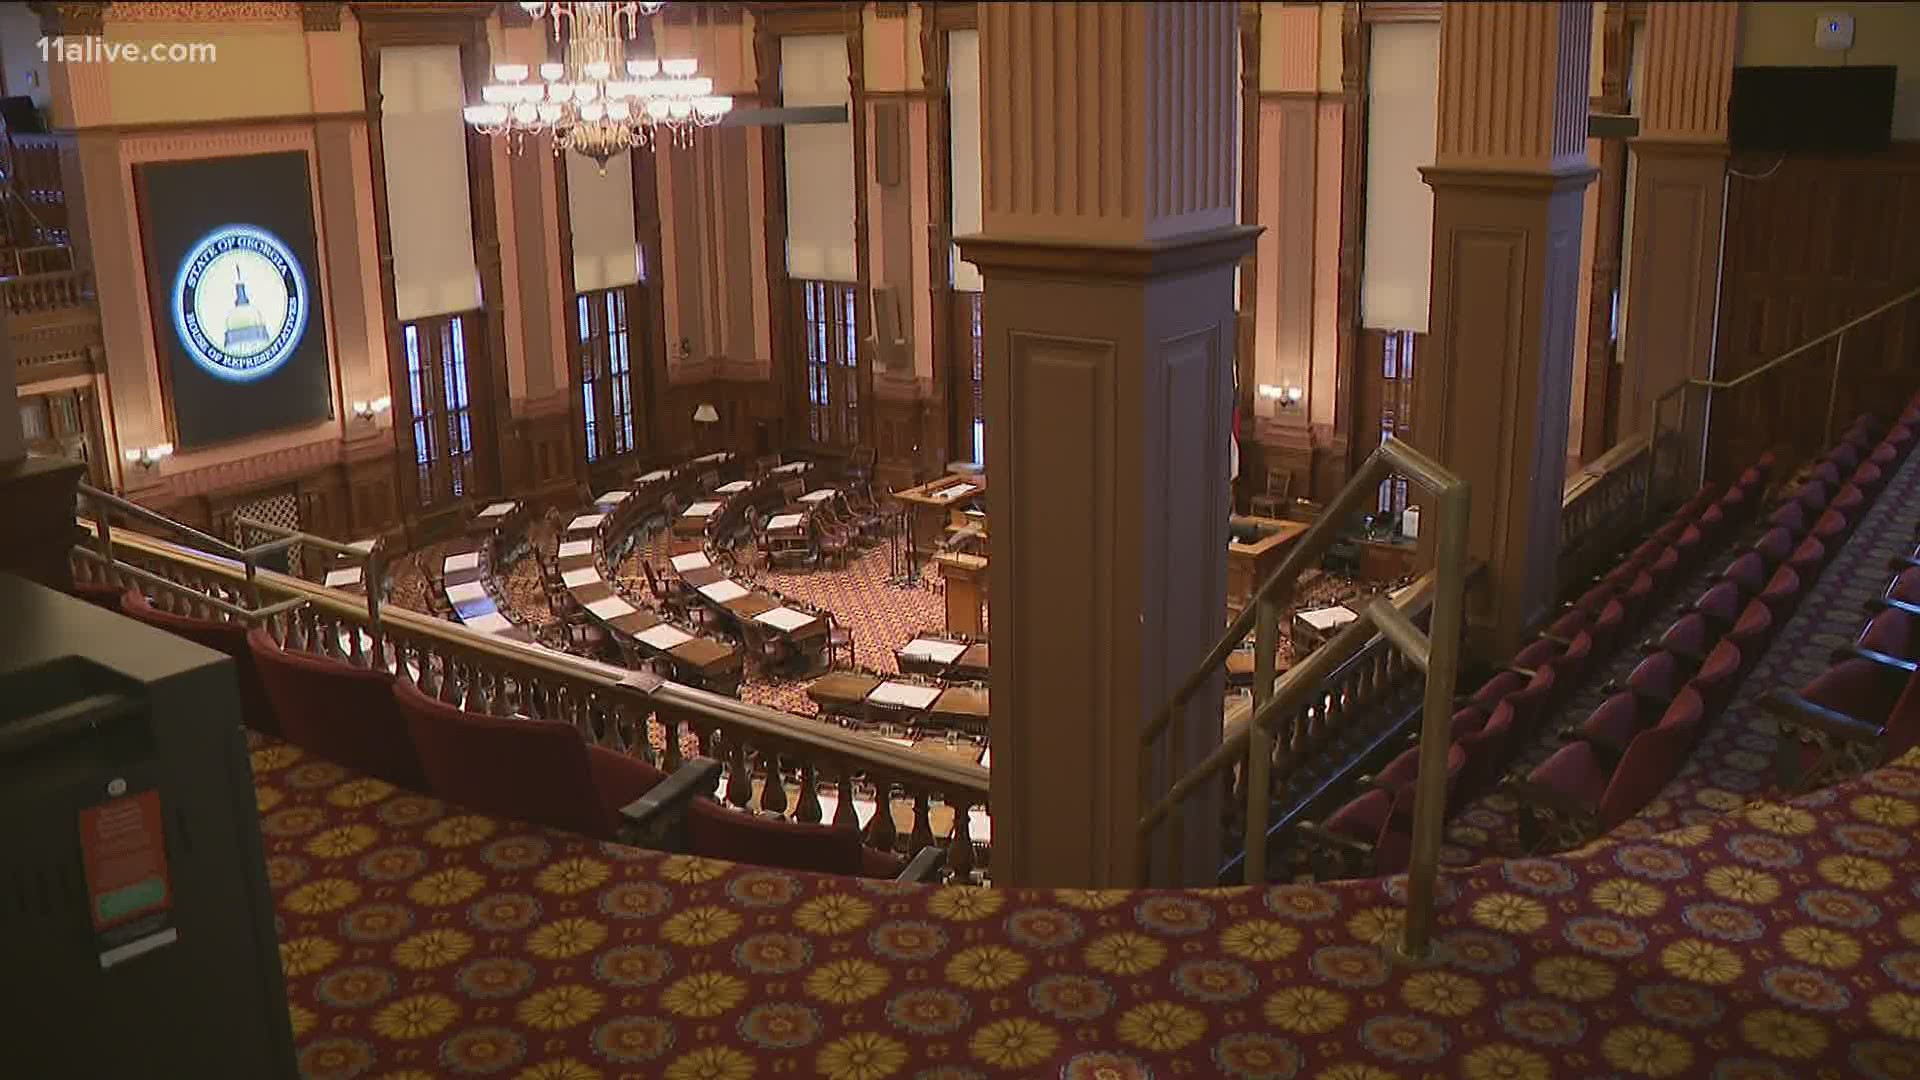 The start of the Georgia General Assembly begins on Monday. Lawmakers will convene amid new security and health restrictions.